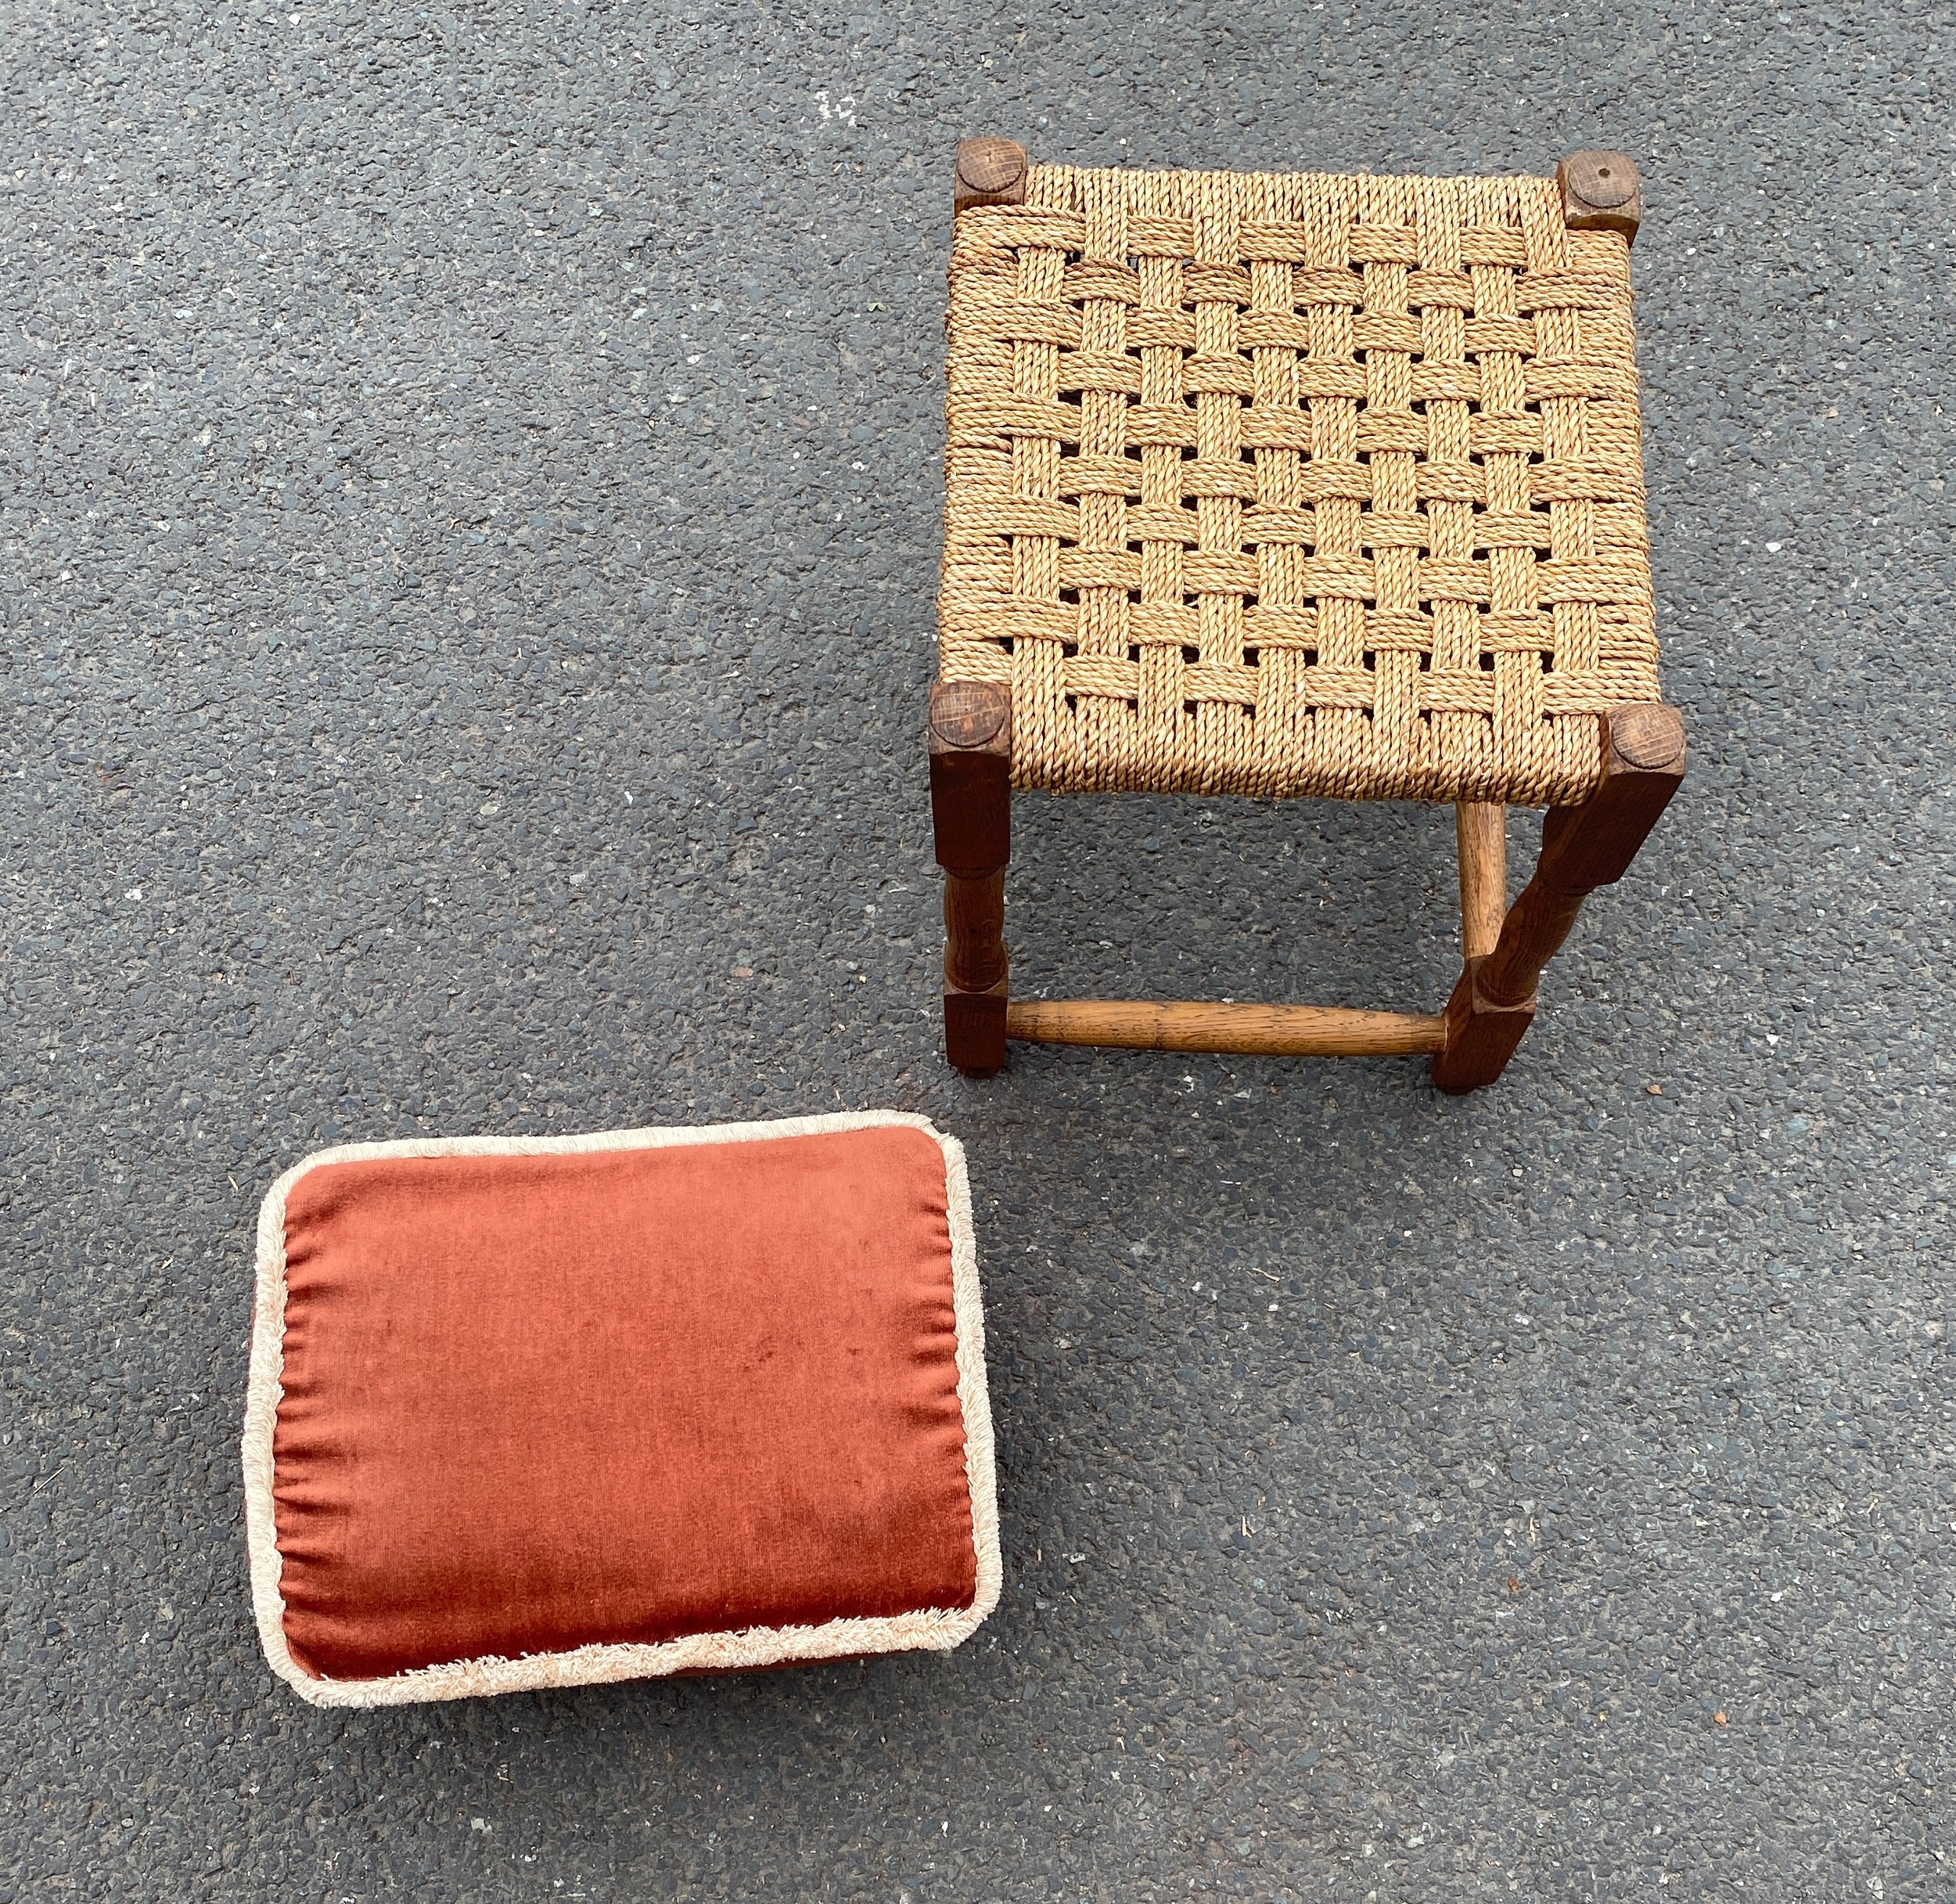 2 Vintage stools, fabric and straw designs - Image 2 of 2